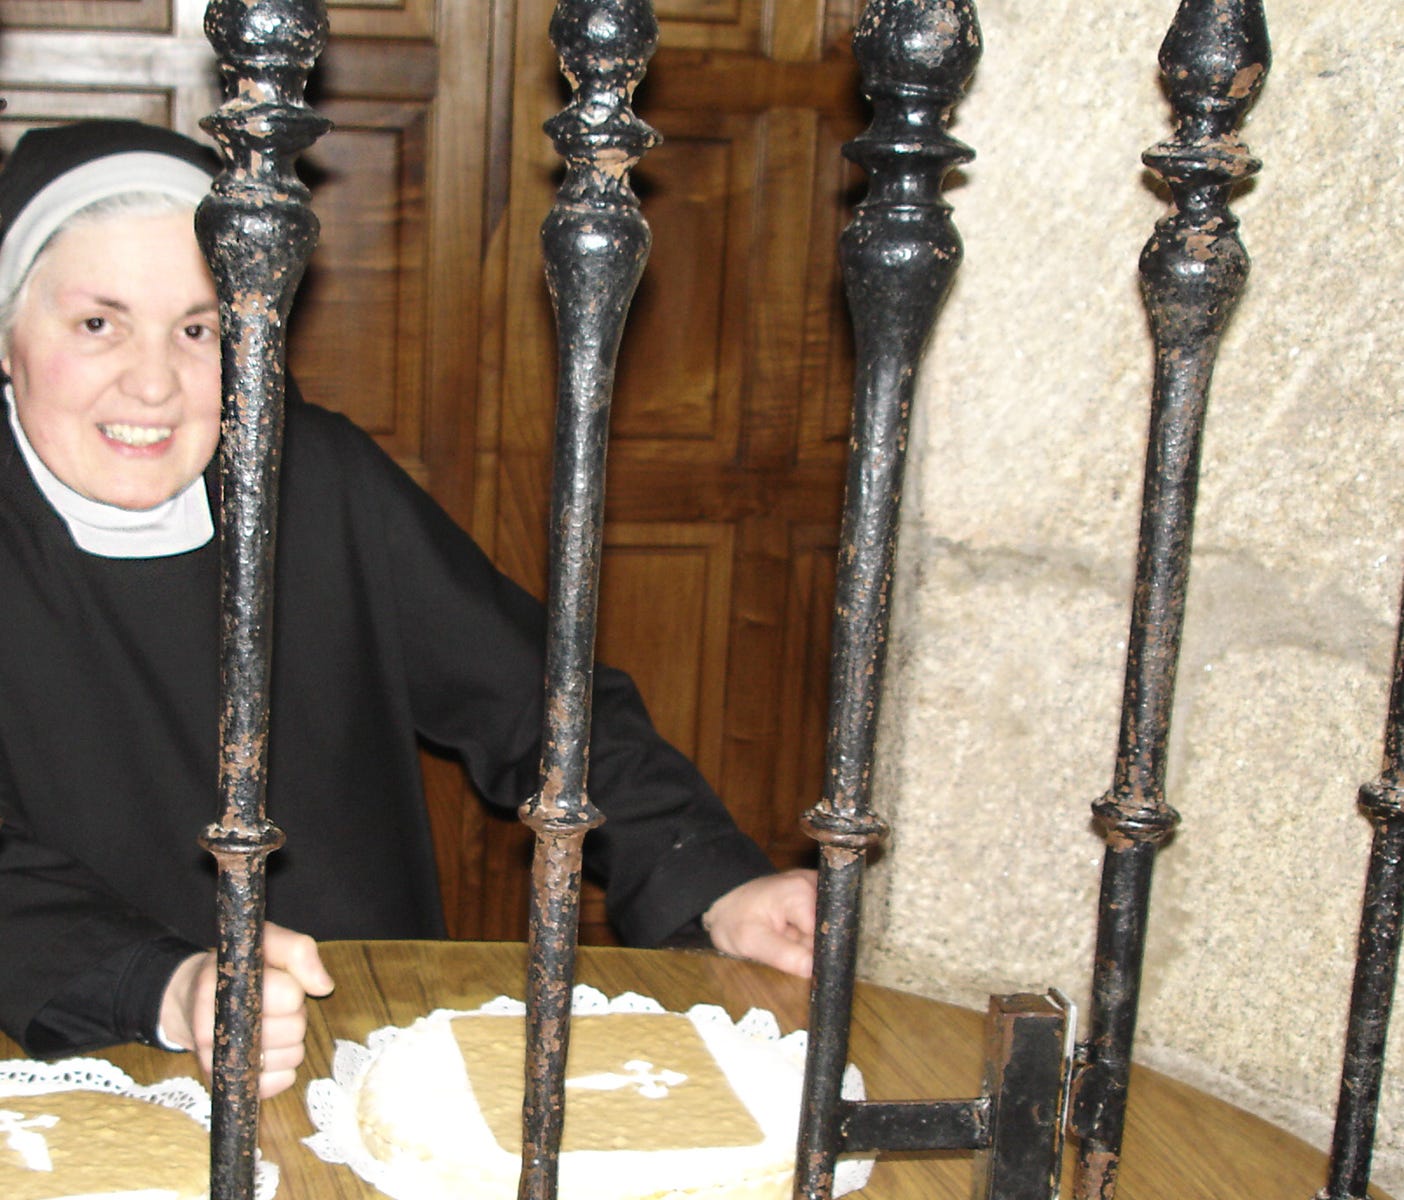 Nuns throughout Spain bake and sell specialty treats, like these almond cakes in Santiago de Compostela.